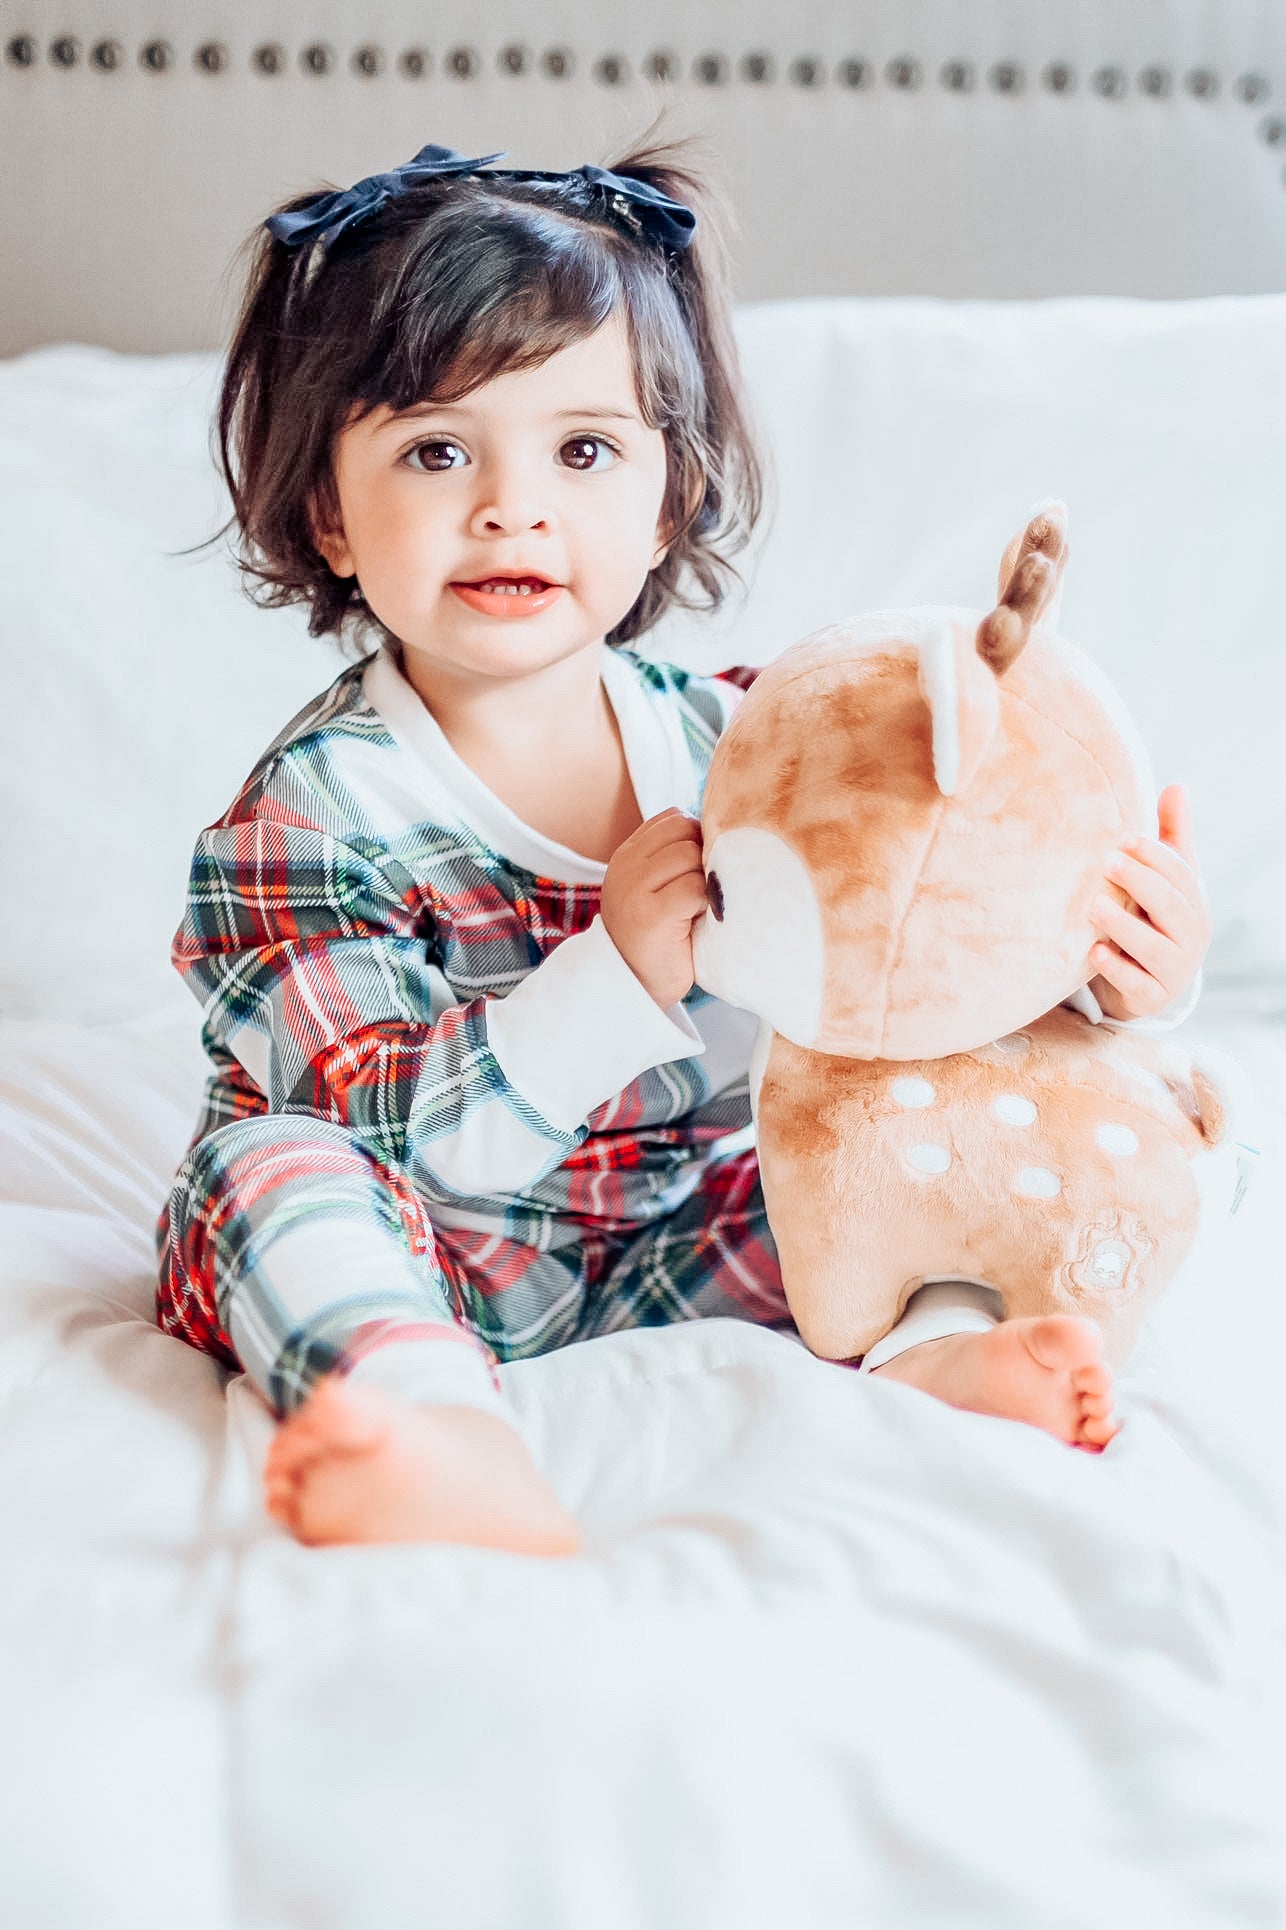 Young child wearing the 2 Pc Christmas Pajamas - Stuart Tartan Holiday Plaid, while playing with a reindeer stuffy.